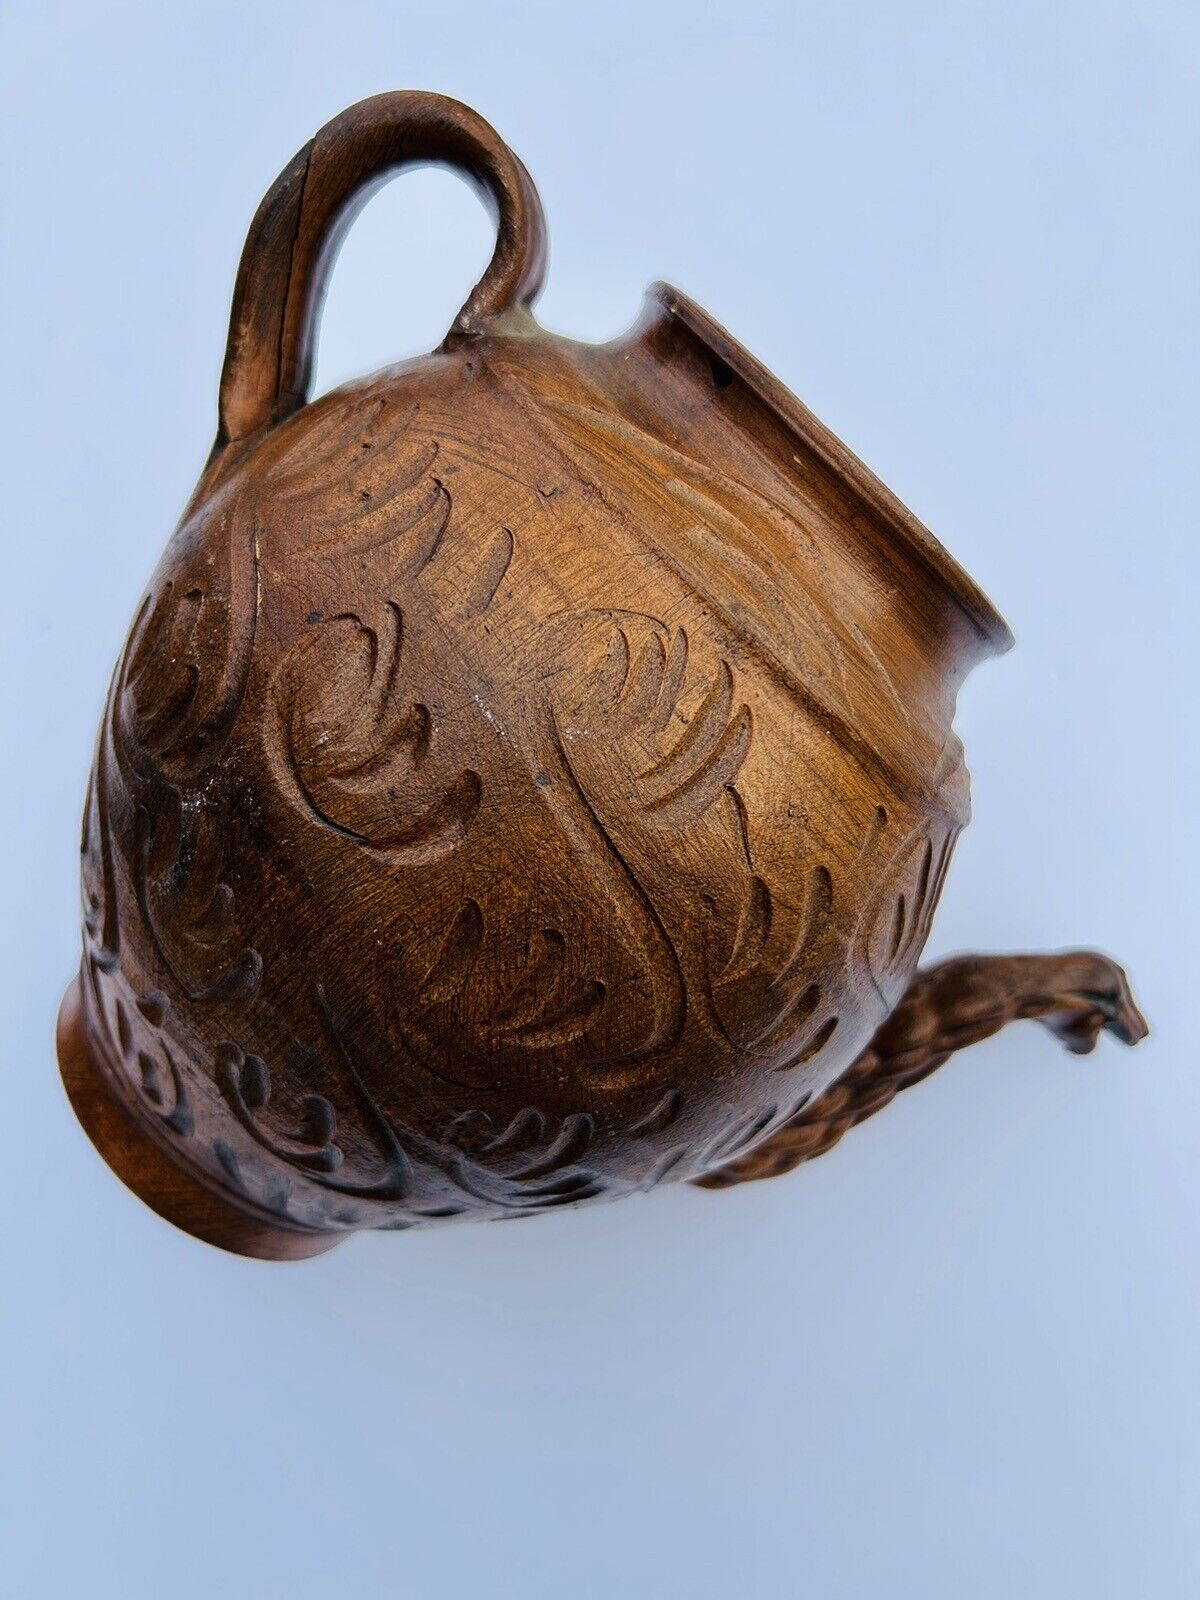 Unique Etched Medium Sized Clay Fired Jug With Snake Ornament 8”unknown Origin 